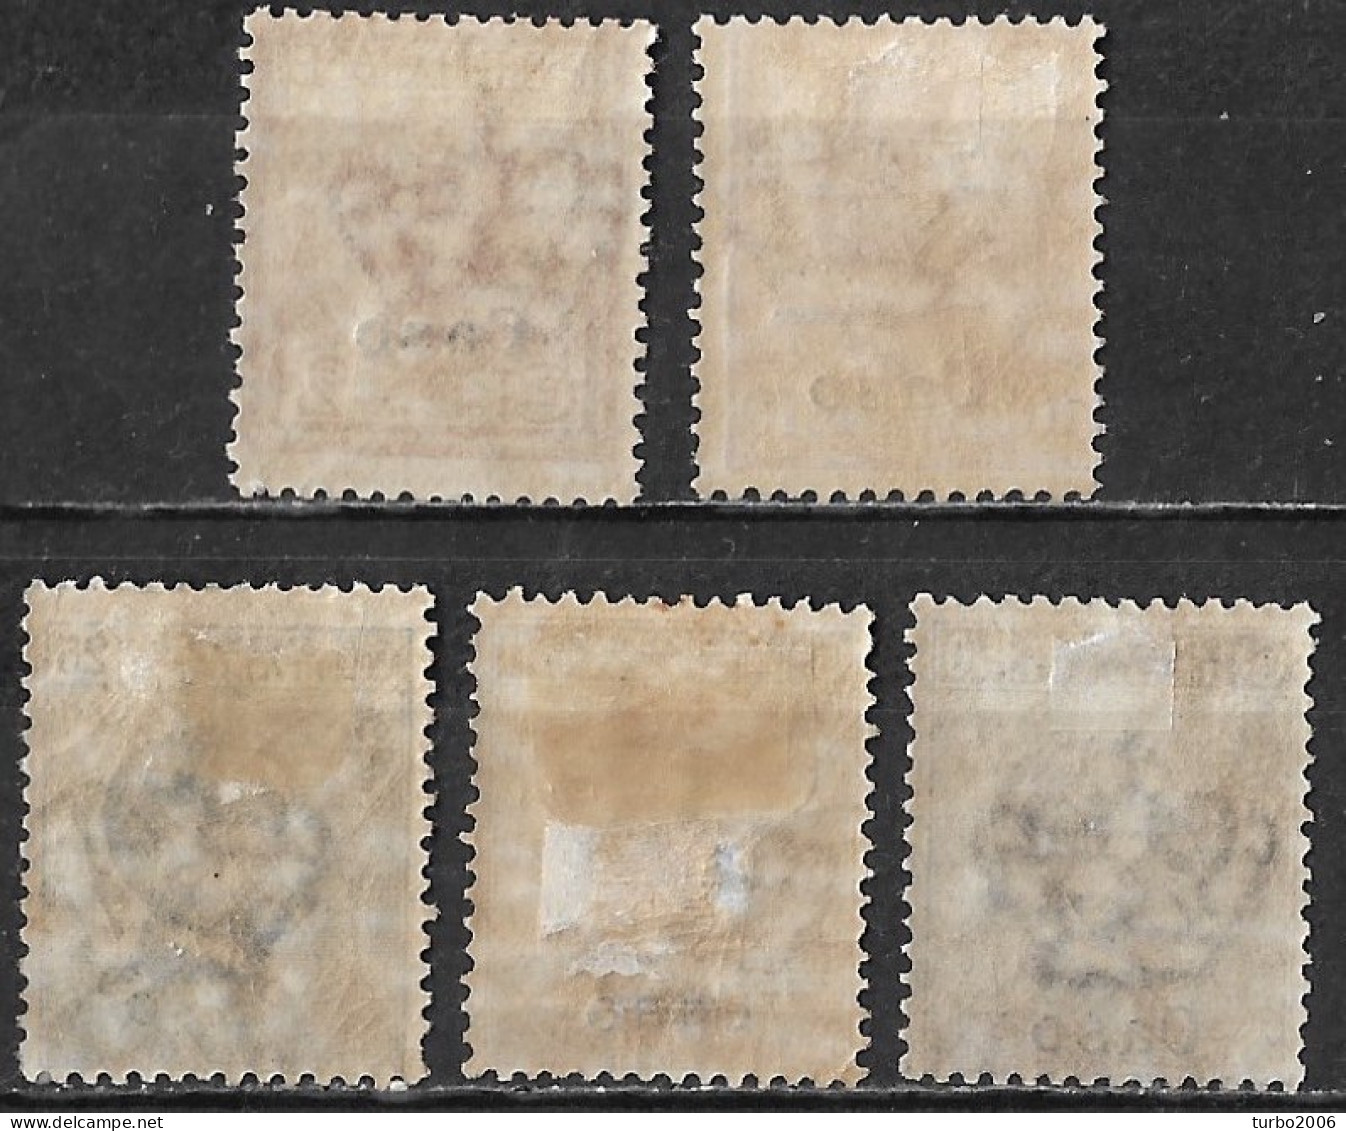 DODECANESE 1912 Italian Stamps With Black Overprint CASO 5 Values From The Set Vl. 1-3-5/7 MH - Dodécanèse